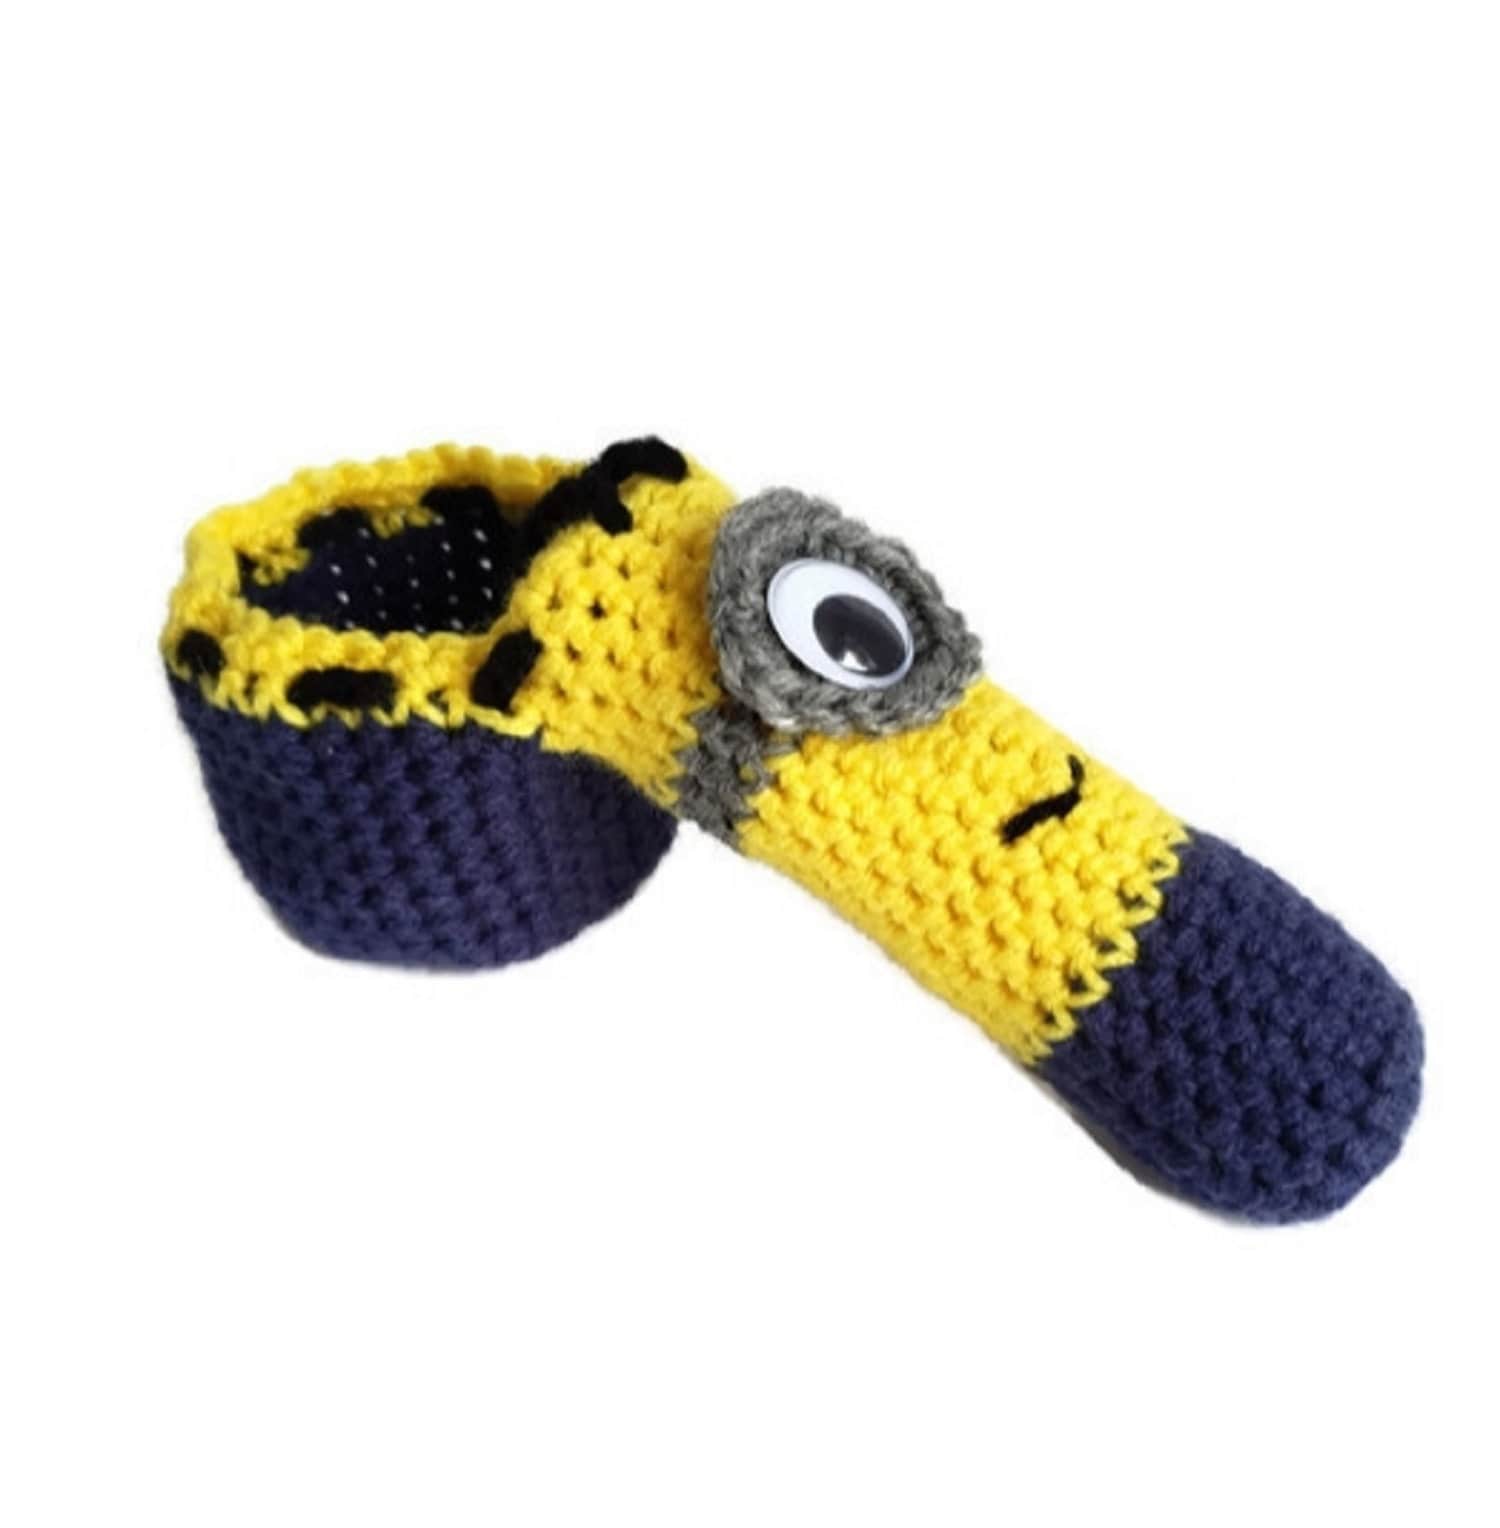 Cock Sock Minion Cock Sock Willy Warmer Minion Willy